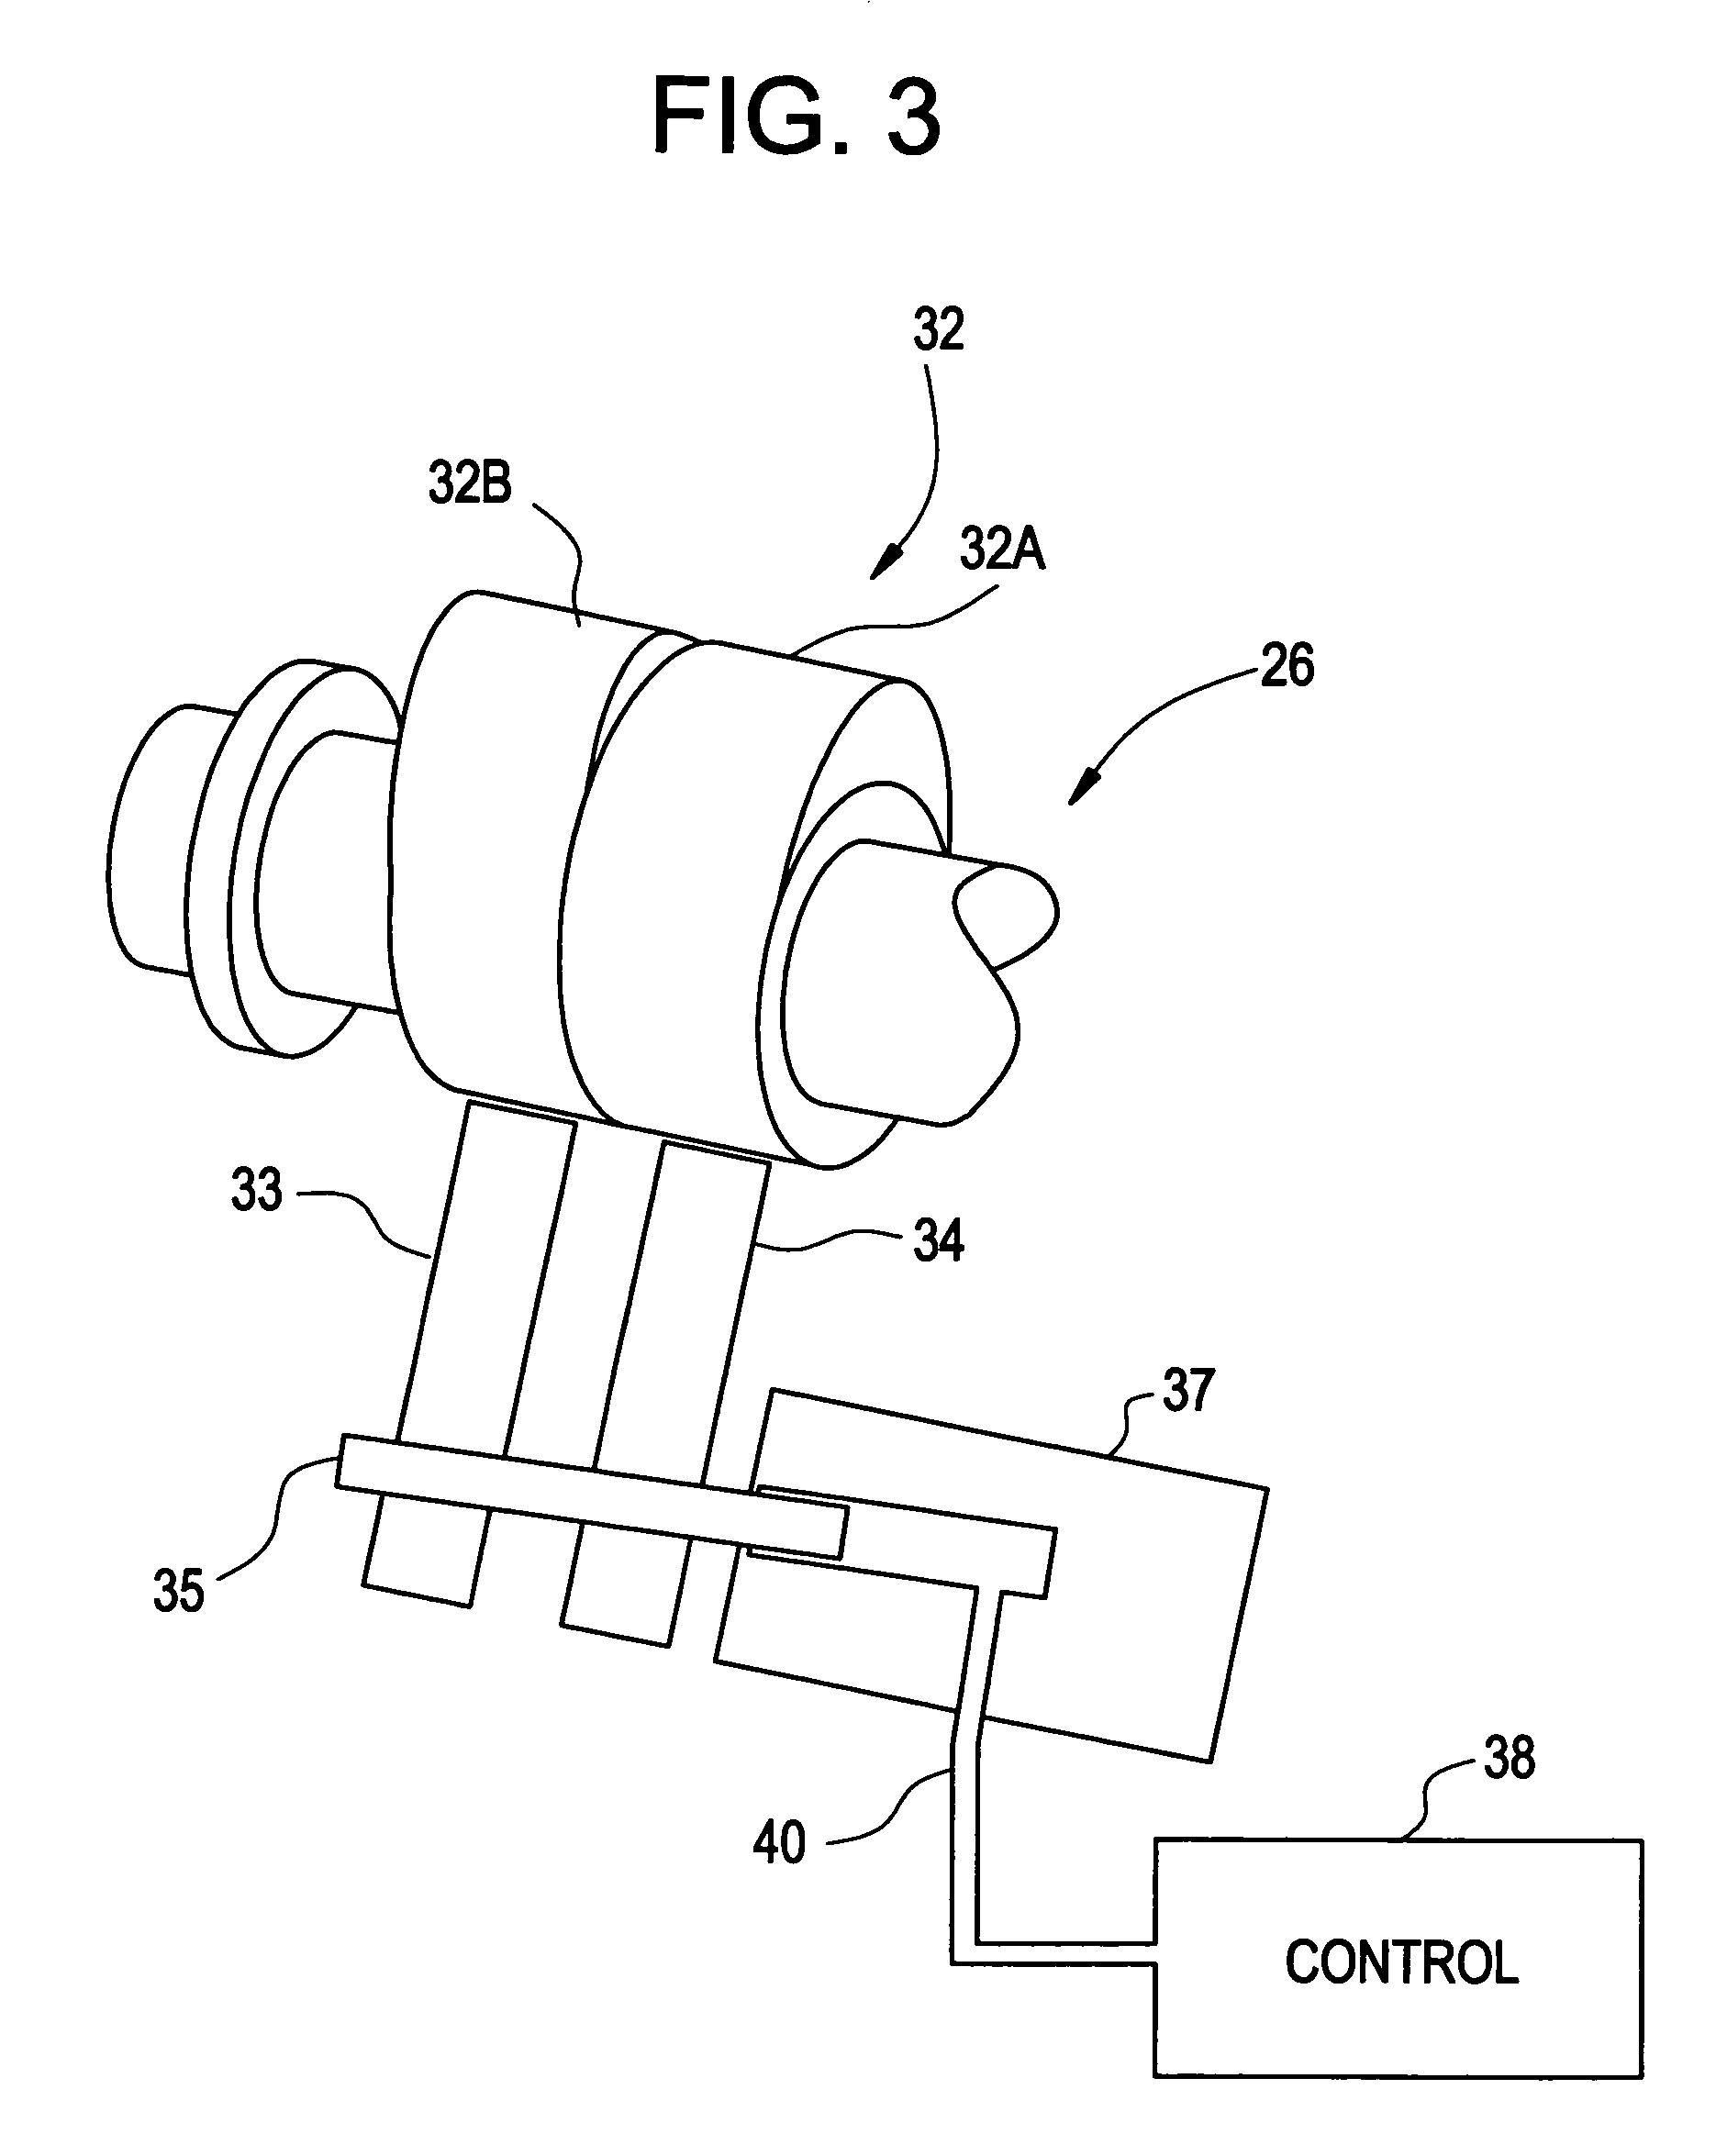 Diesel engine with dual-lobed intake cam for compression ratio control